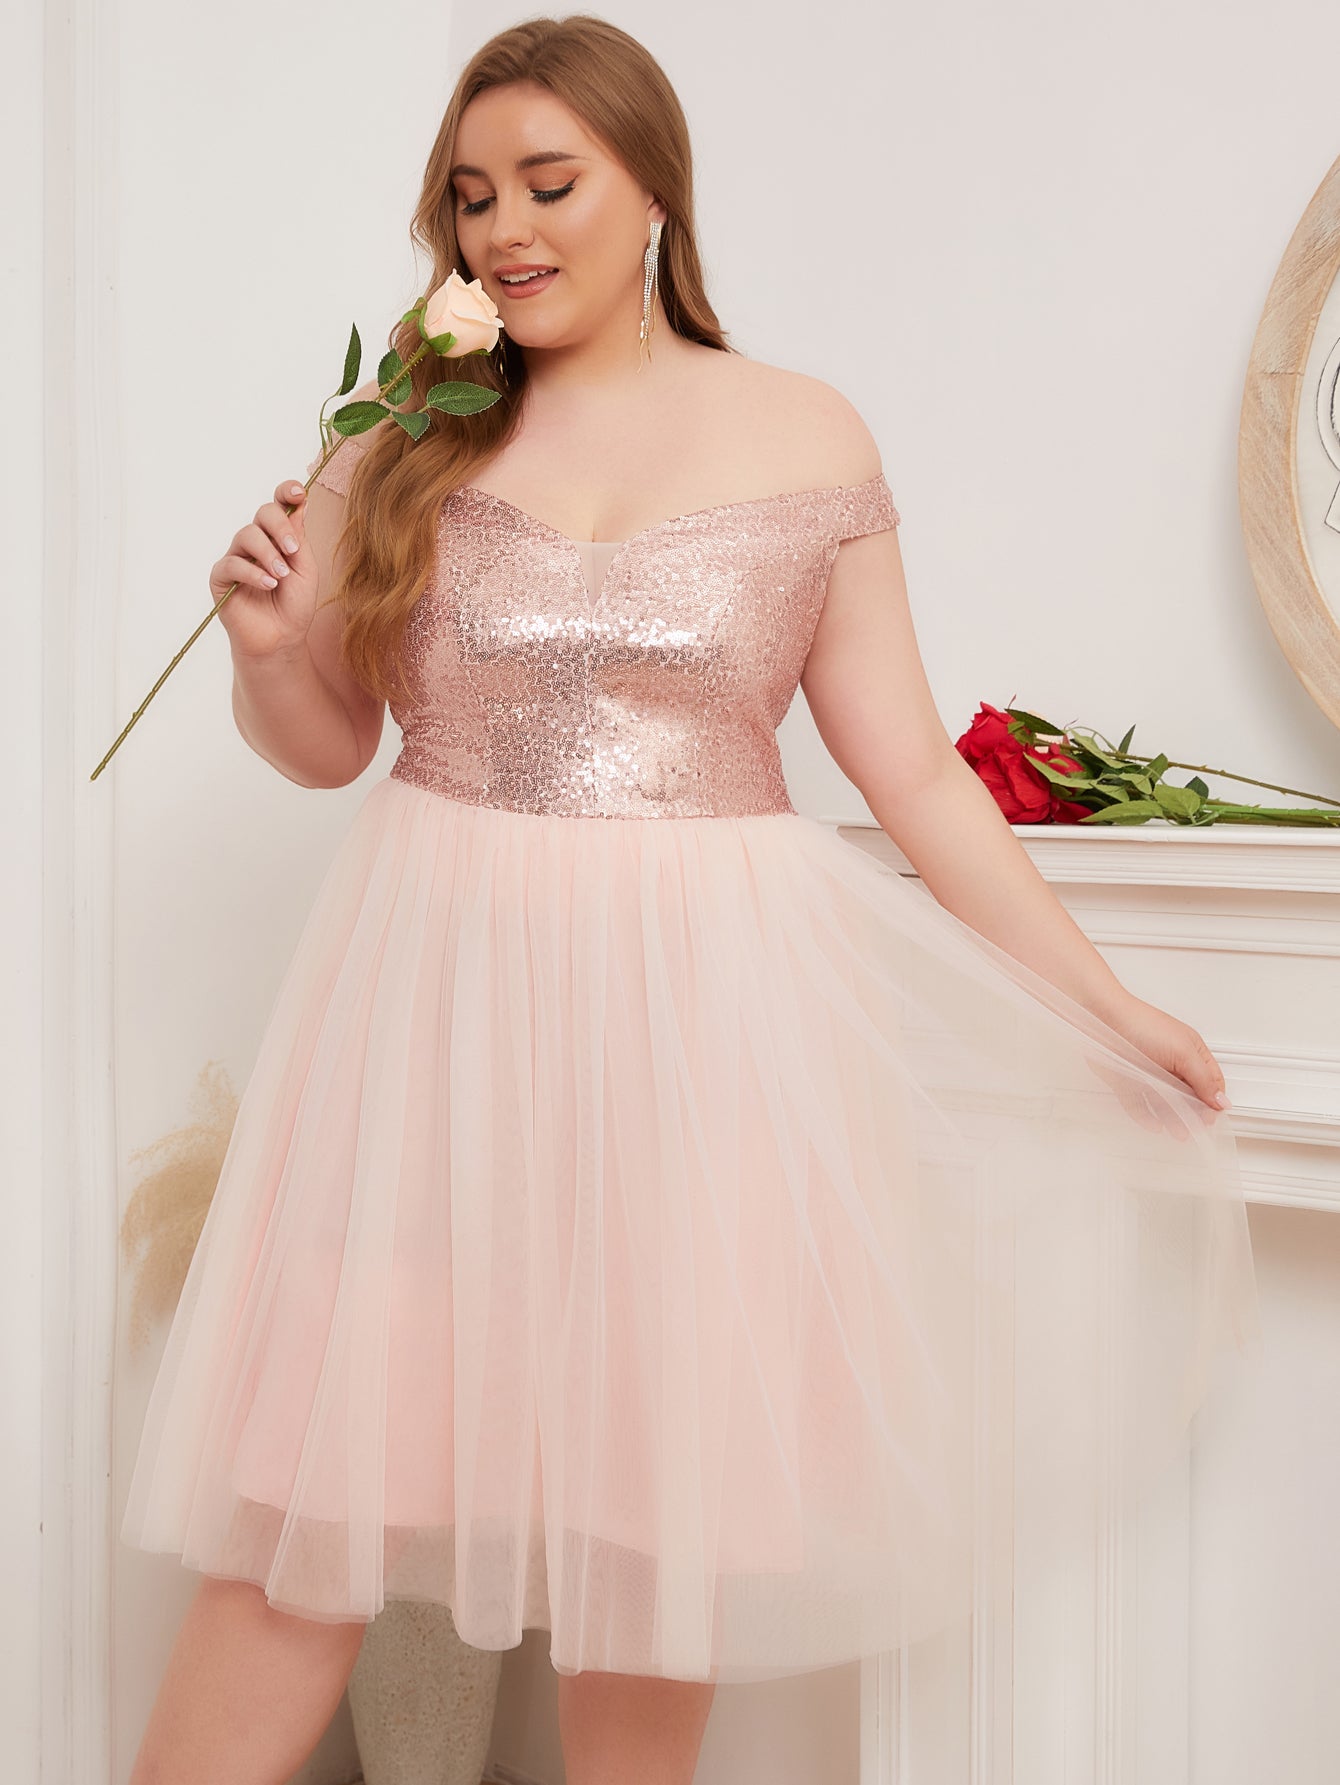 Women's Plus Size Fit & Flare Party Dress For Wedding Guest Mother of Brides Graduation Prom Gowns Holiday Photoshoot Dress,Rosegold£¬3XL